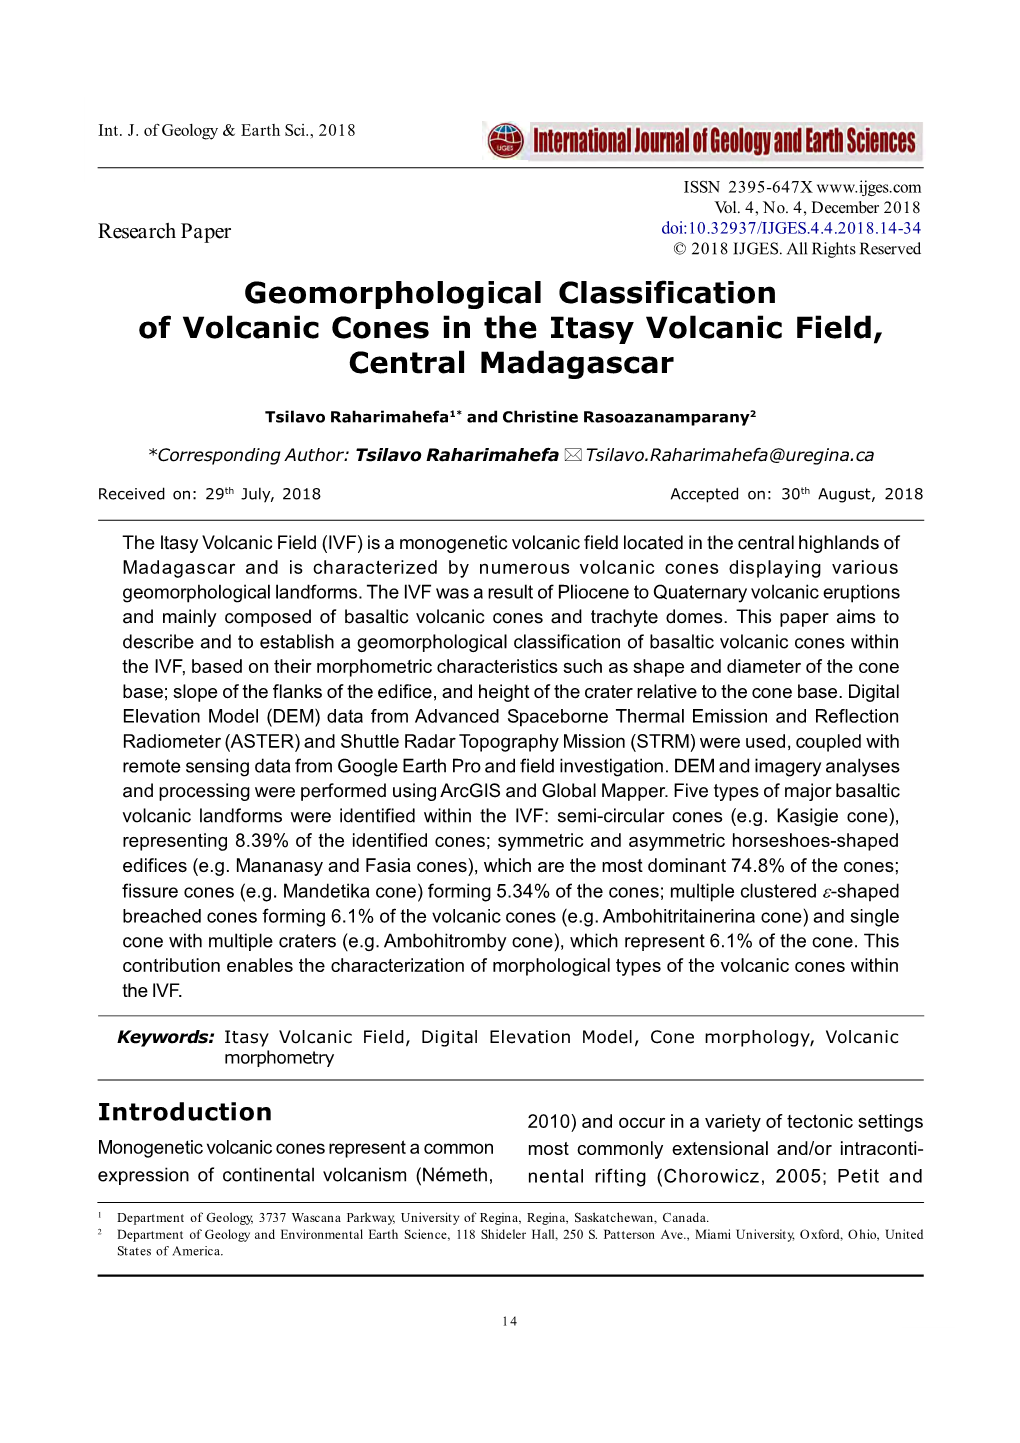 Geomorphological Classification of Volcanic Cones in the Itasy Volcanic Field, Central Madagascar